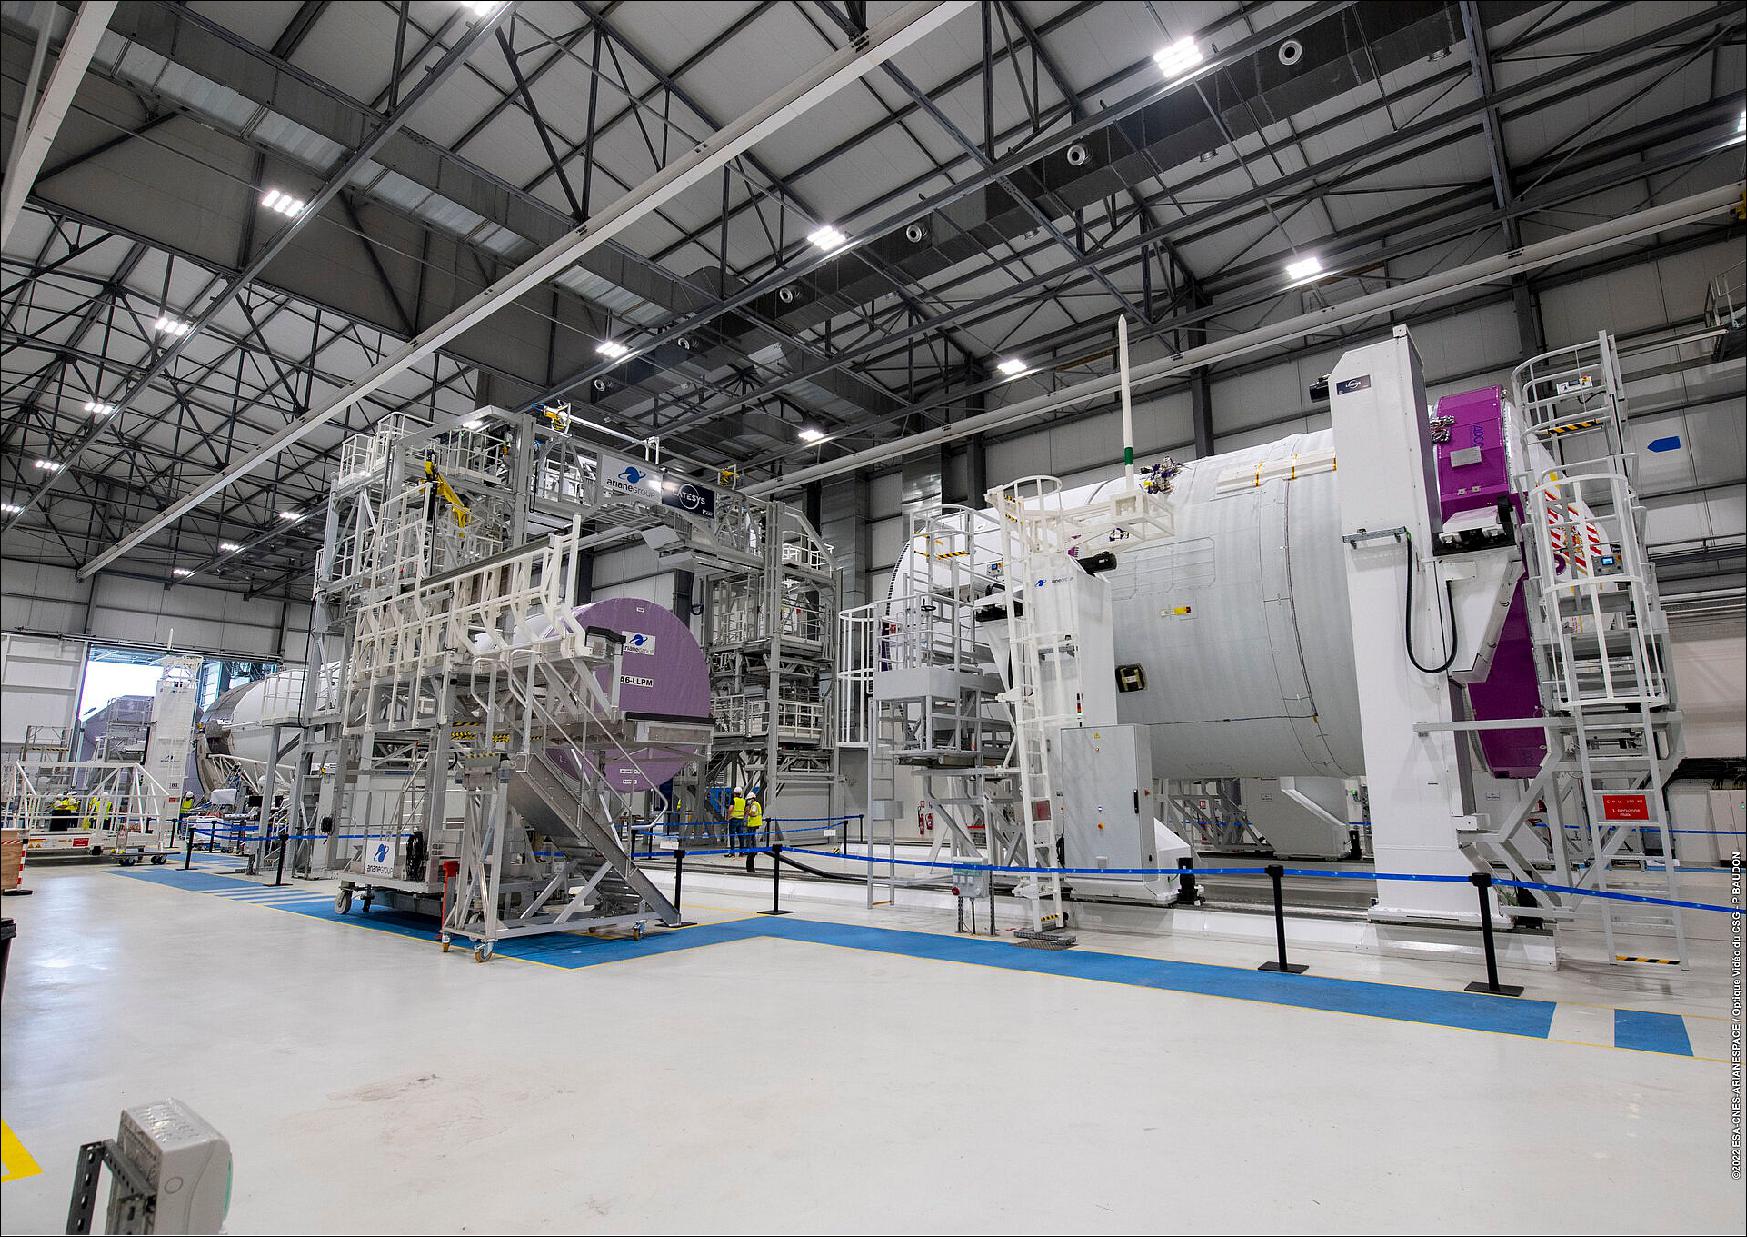 Figure 17: Ariane 6 central core set for assembly in the assembly hall at Europe's Spaceport in French Guiana (image credit: ESA/CNES/Arianespace)